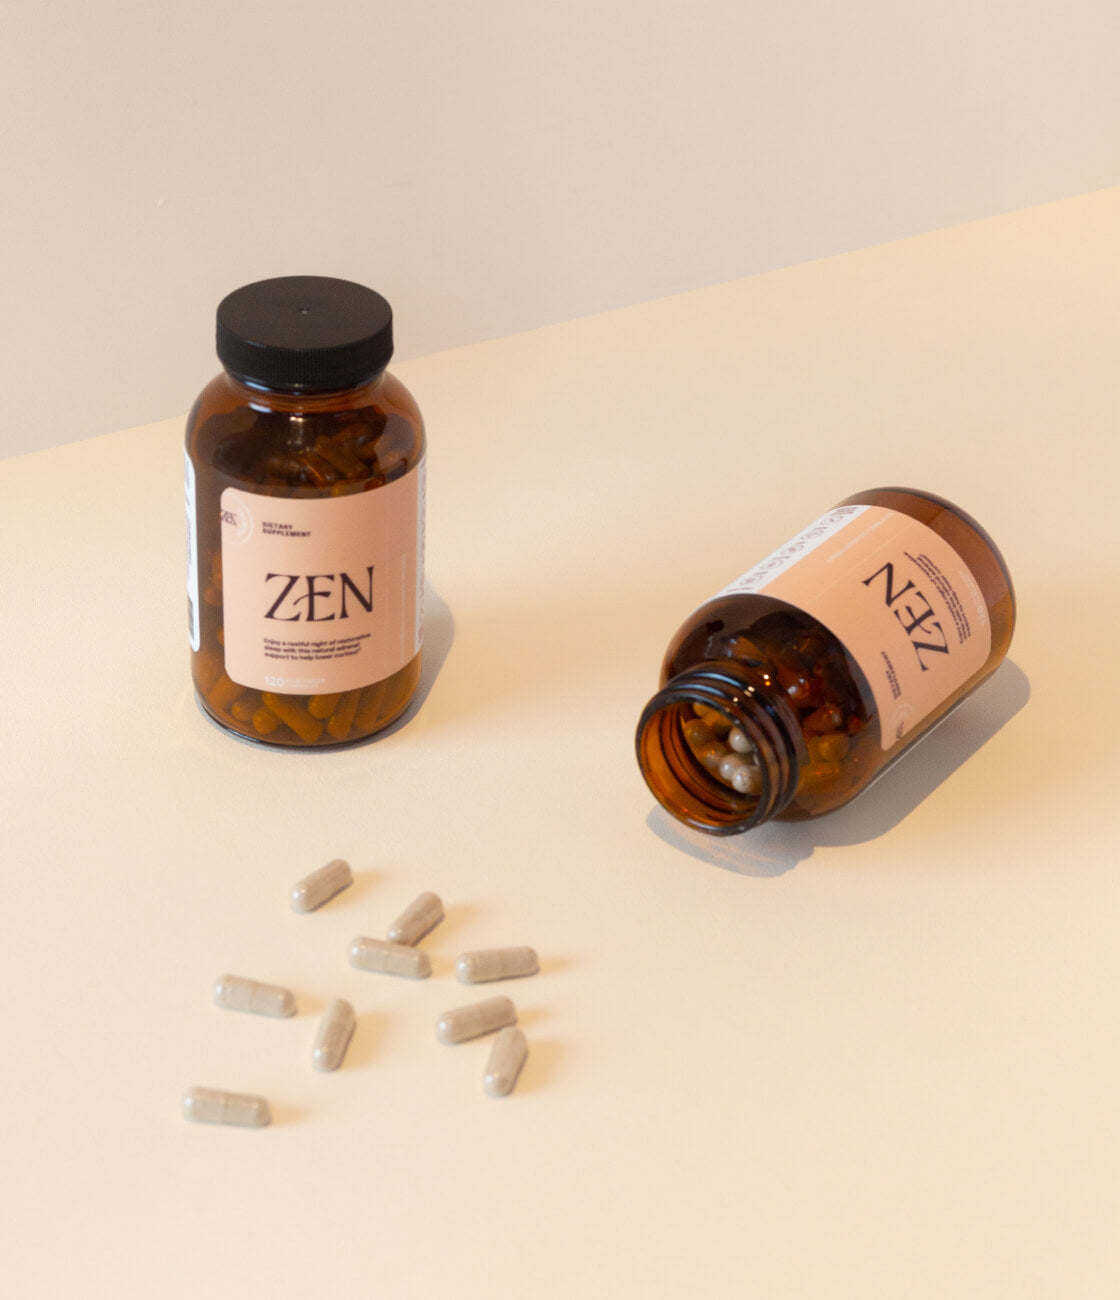 Zen comes with 120 capsules, enough to take 2 capsules a day for a few months when used as directed. [AD: 2 bottles of Zen on a plain cream backdrop and shown. 1 bottle is open with a few pills scattered on the tabletop]